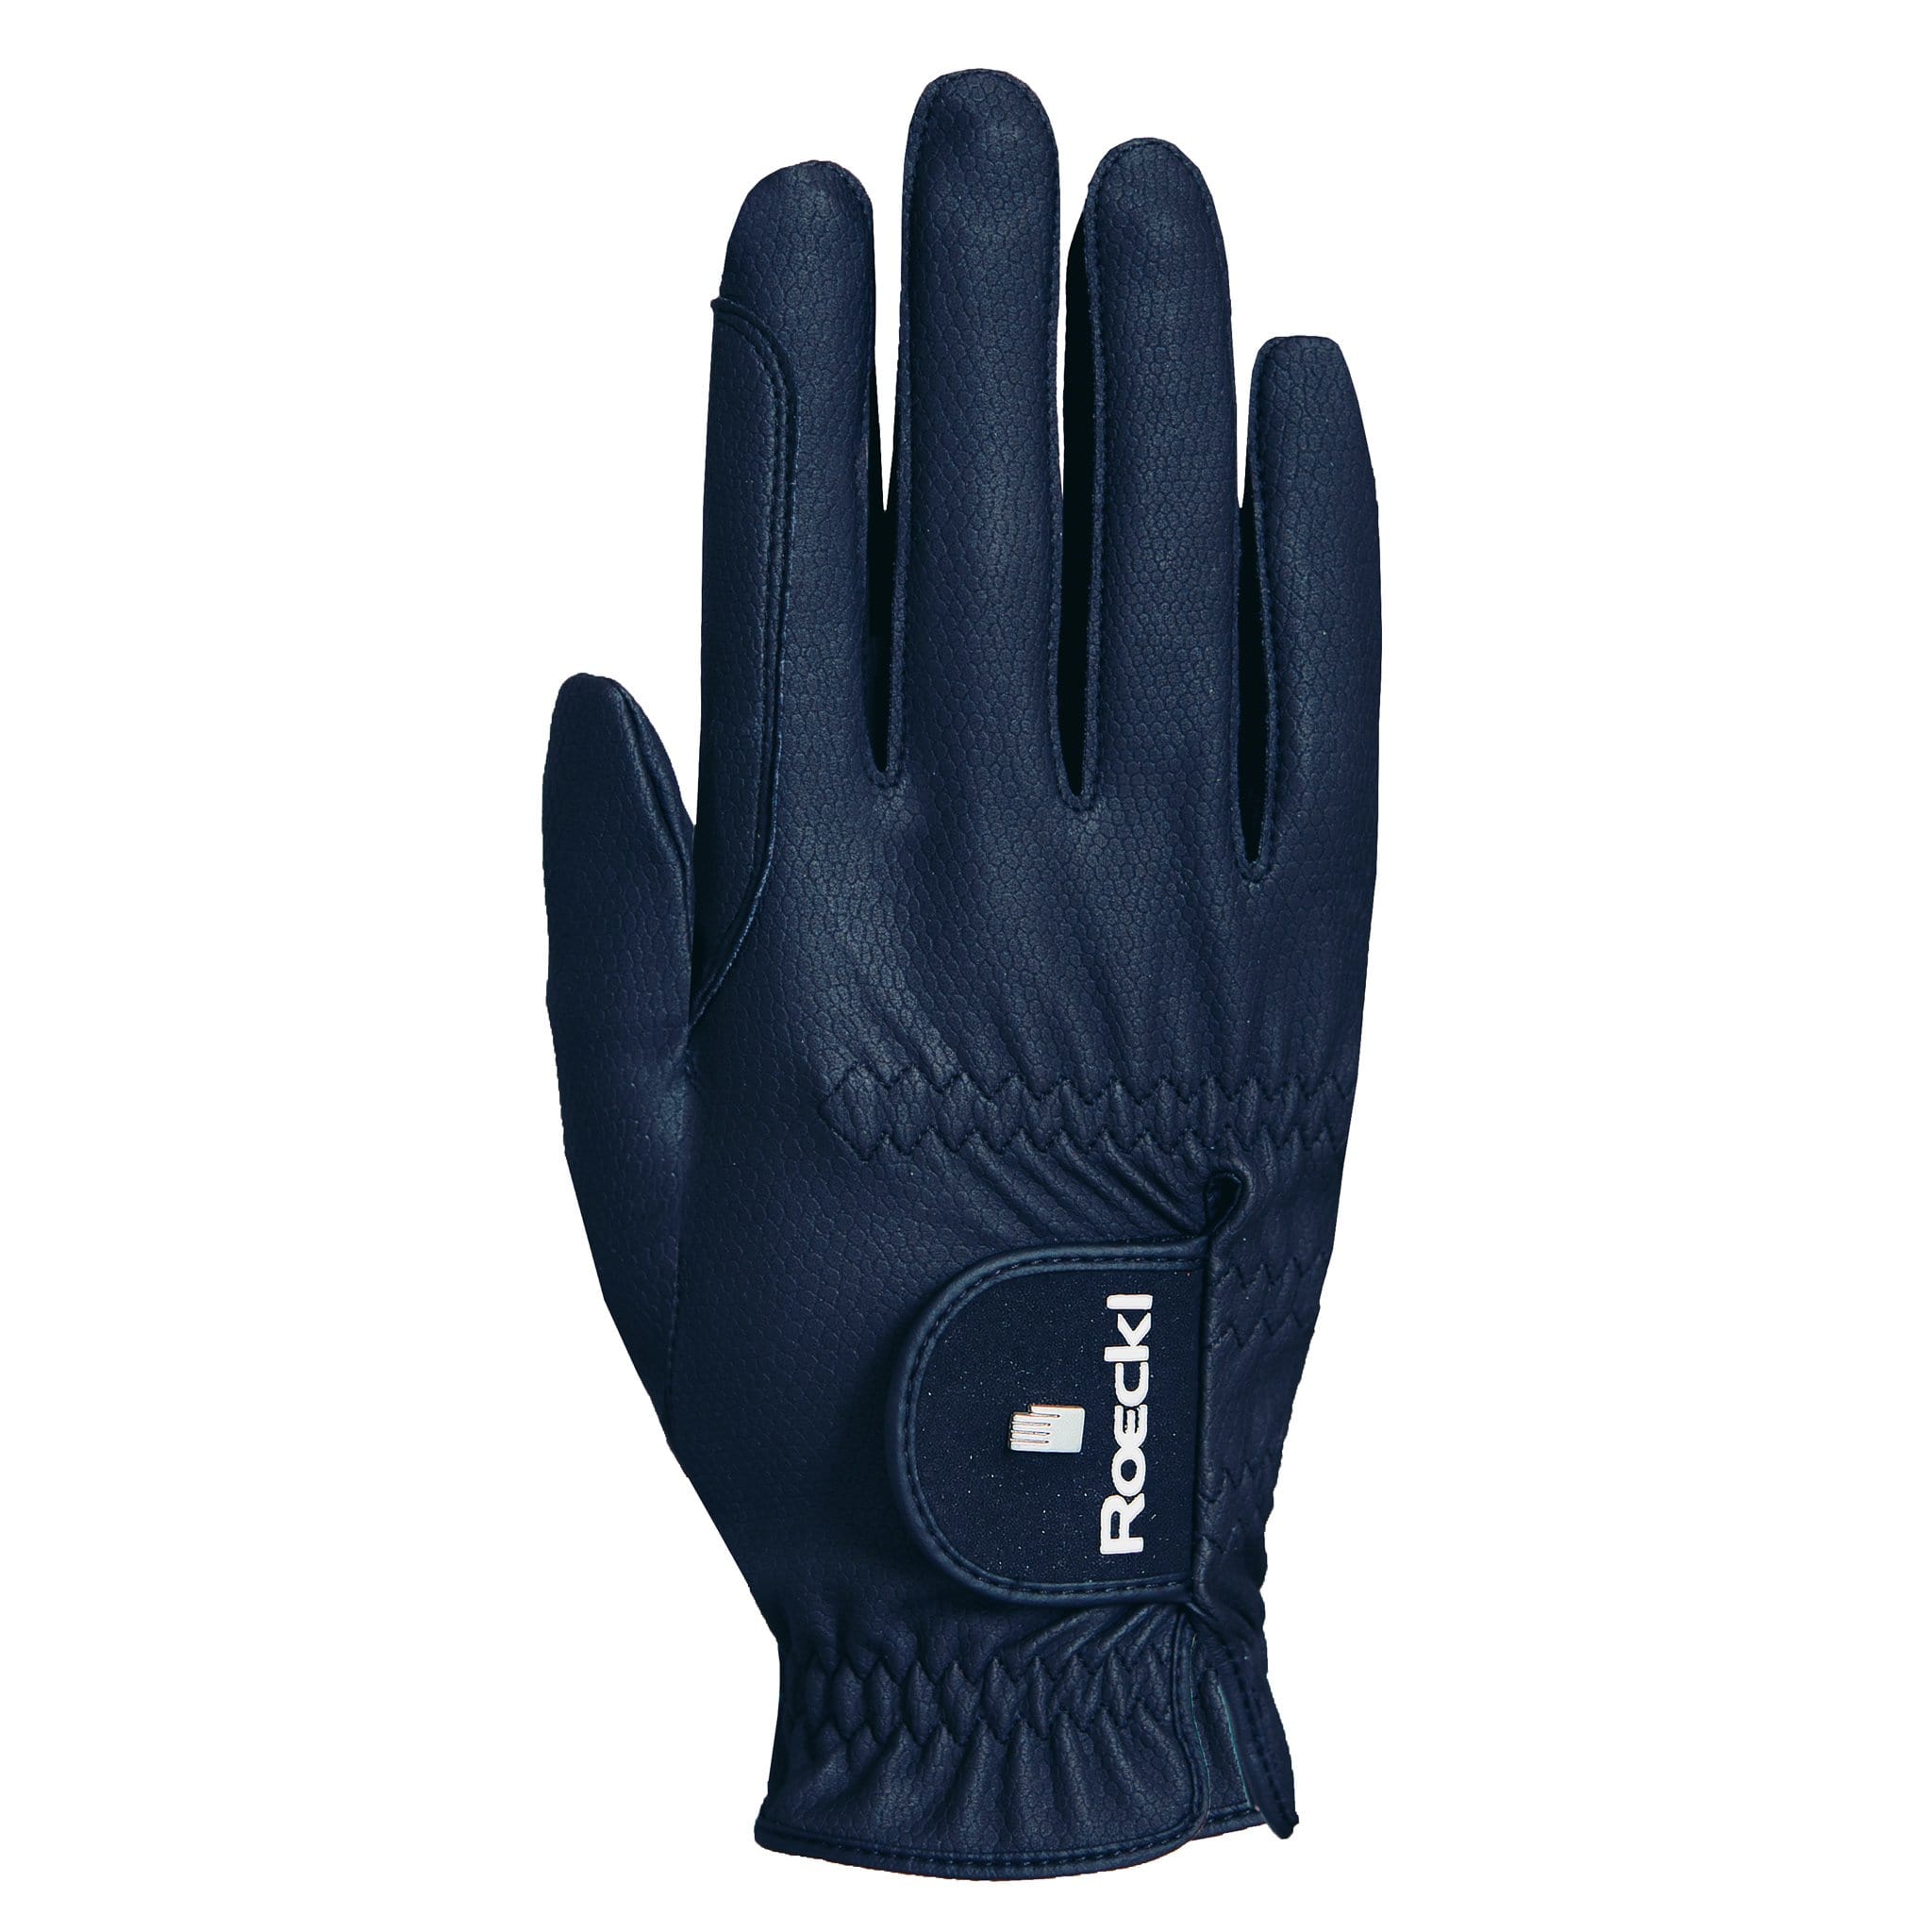 Roeckl Chester Pro Gloves 3301-108-590 Navy Blue Back View